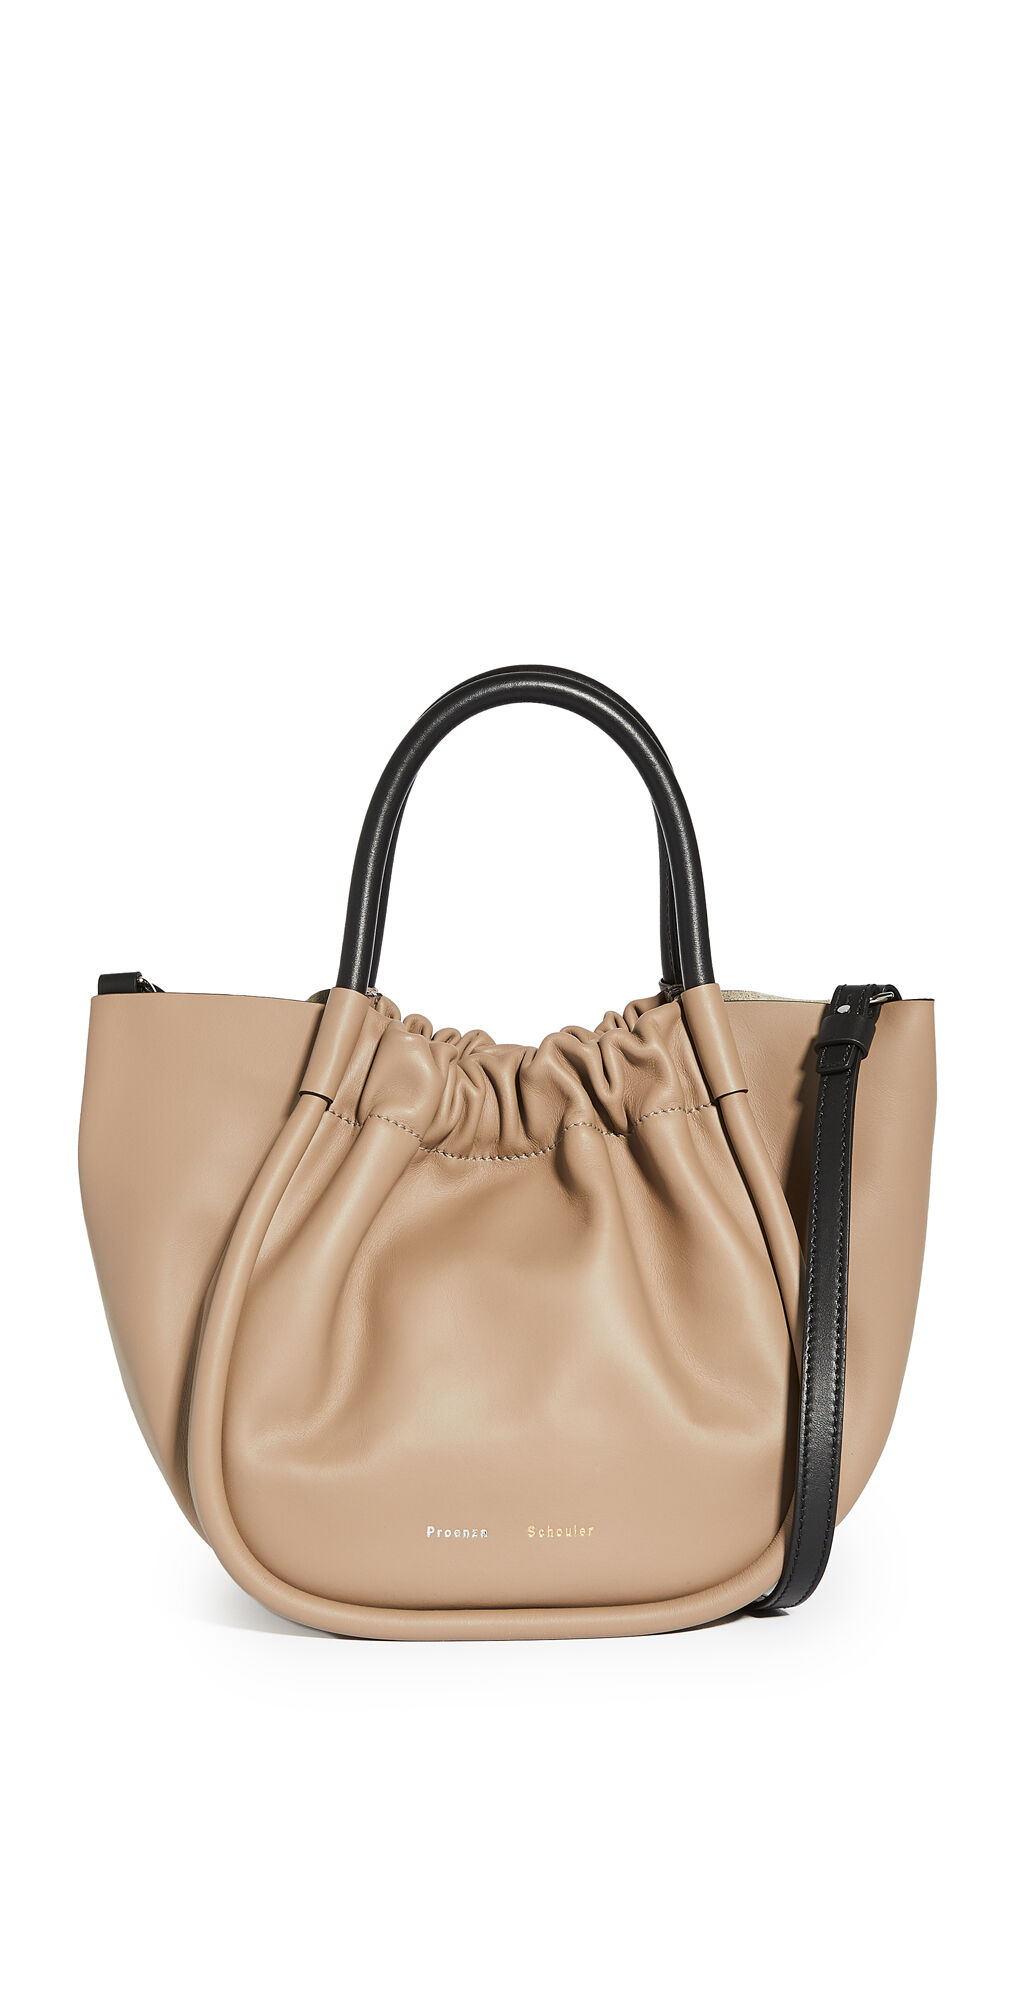 Proenza Schouler Small Ruched Tote Light Taupe One Size  Light Taupe  size:One Size